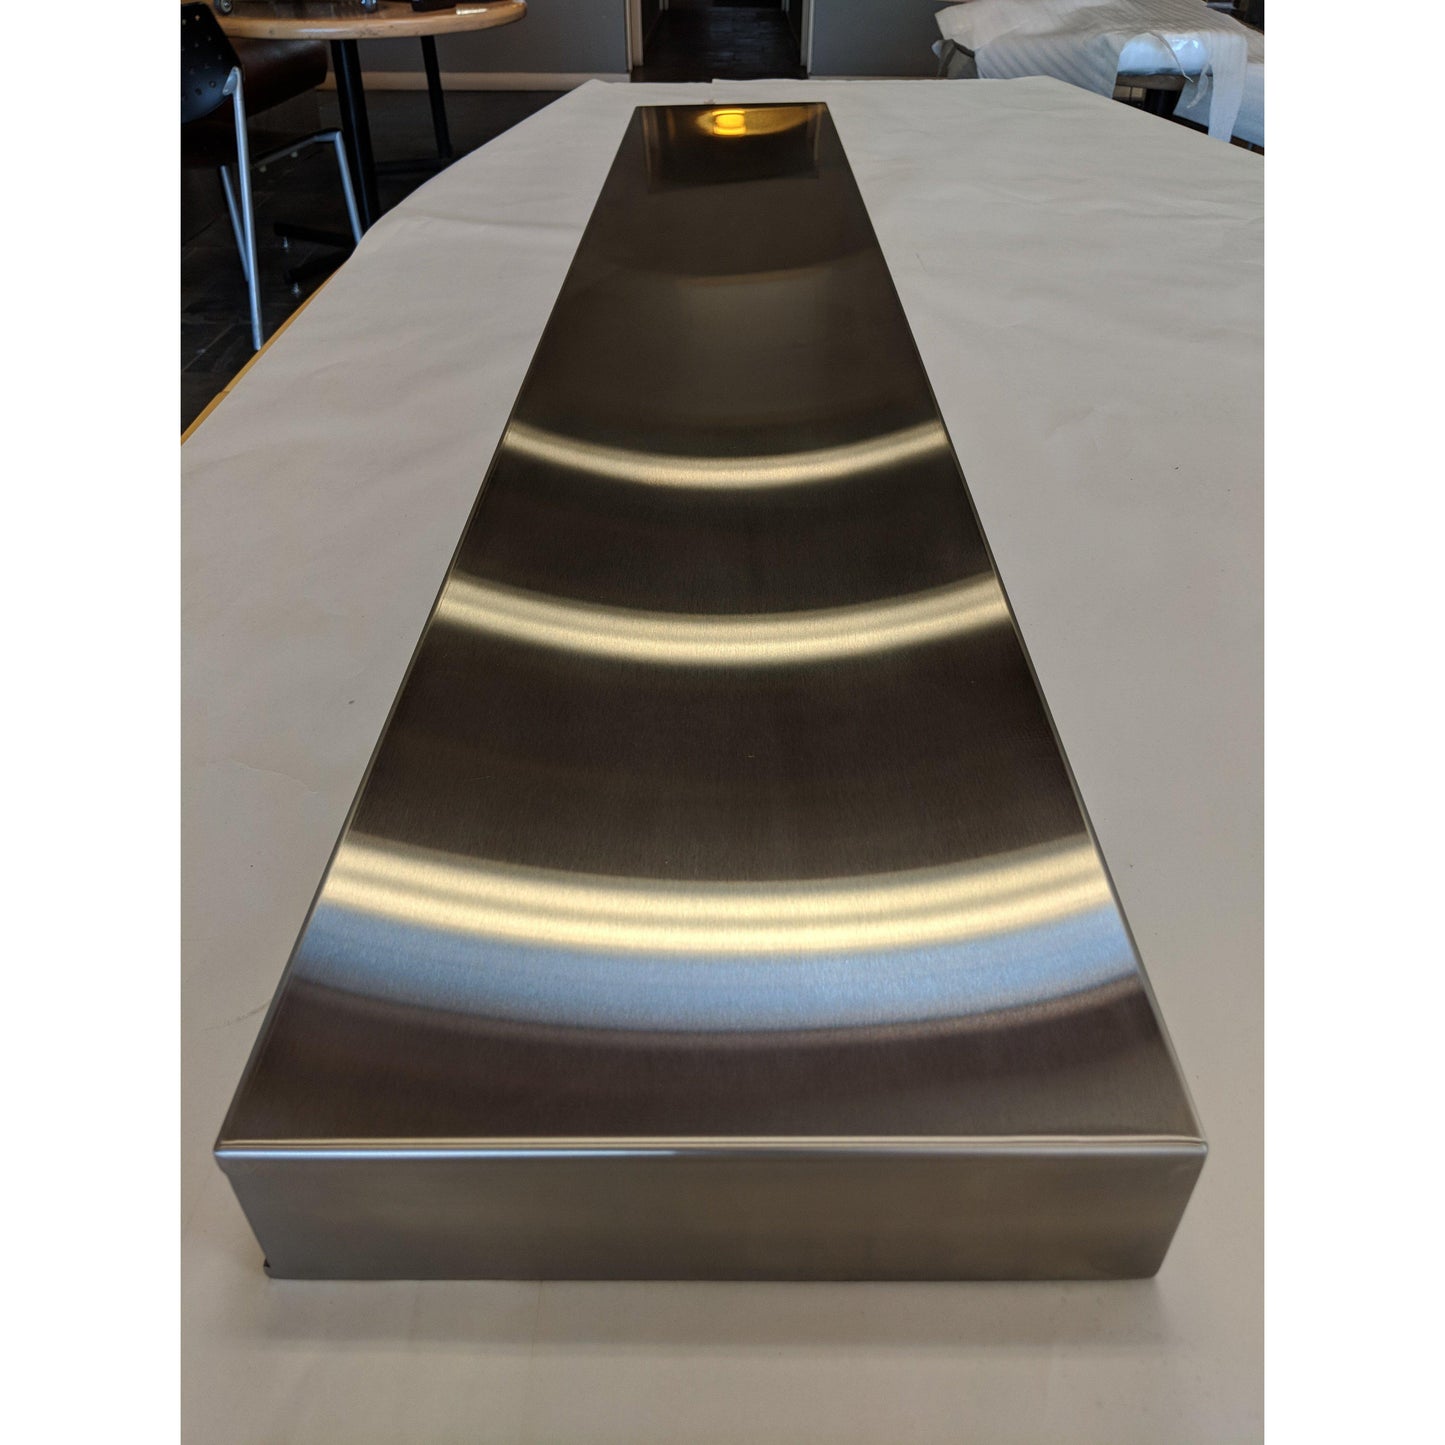 Top of Stainless Steel Floating Shelf with Brushed Finish